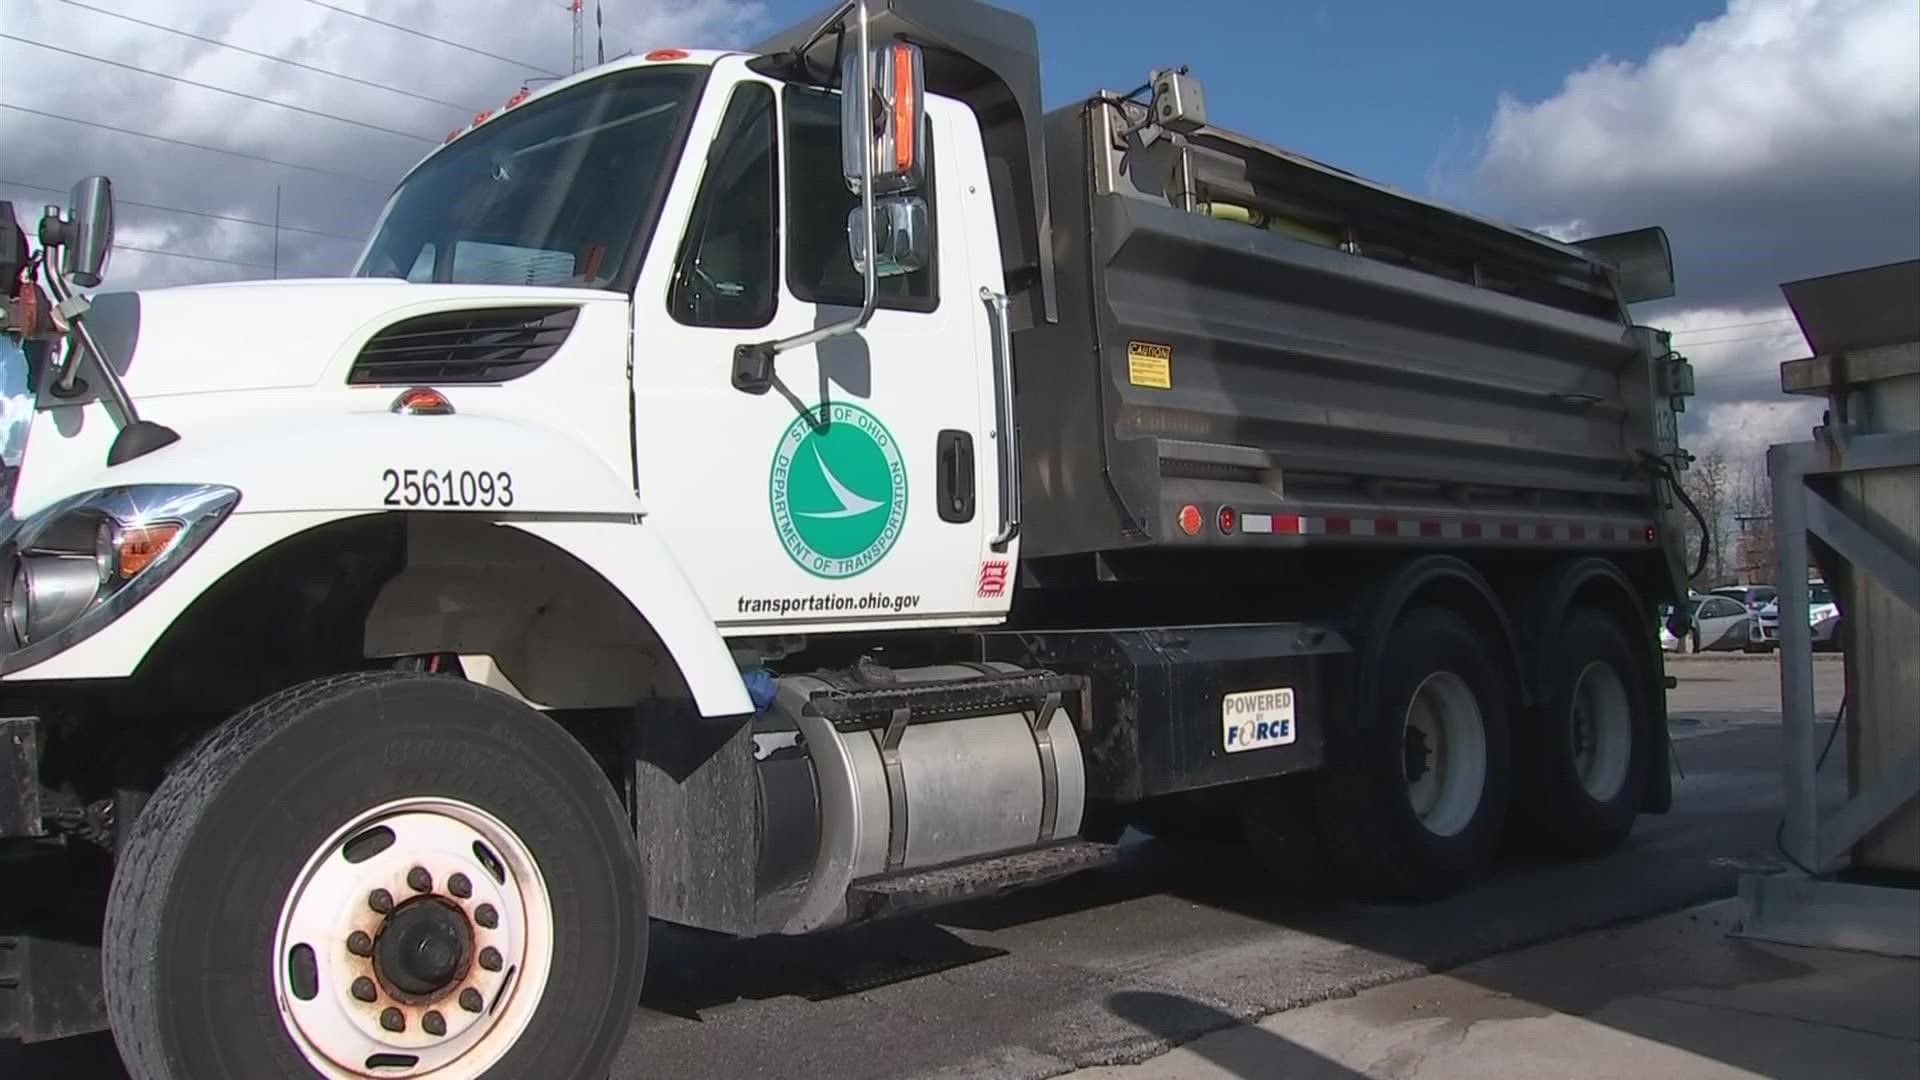 ODOT is facing a roughly 50% shortage of drivers this season, so residents may have to wait longer for routes to be cleared during Thursday’s winter weather.